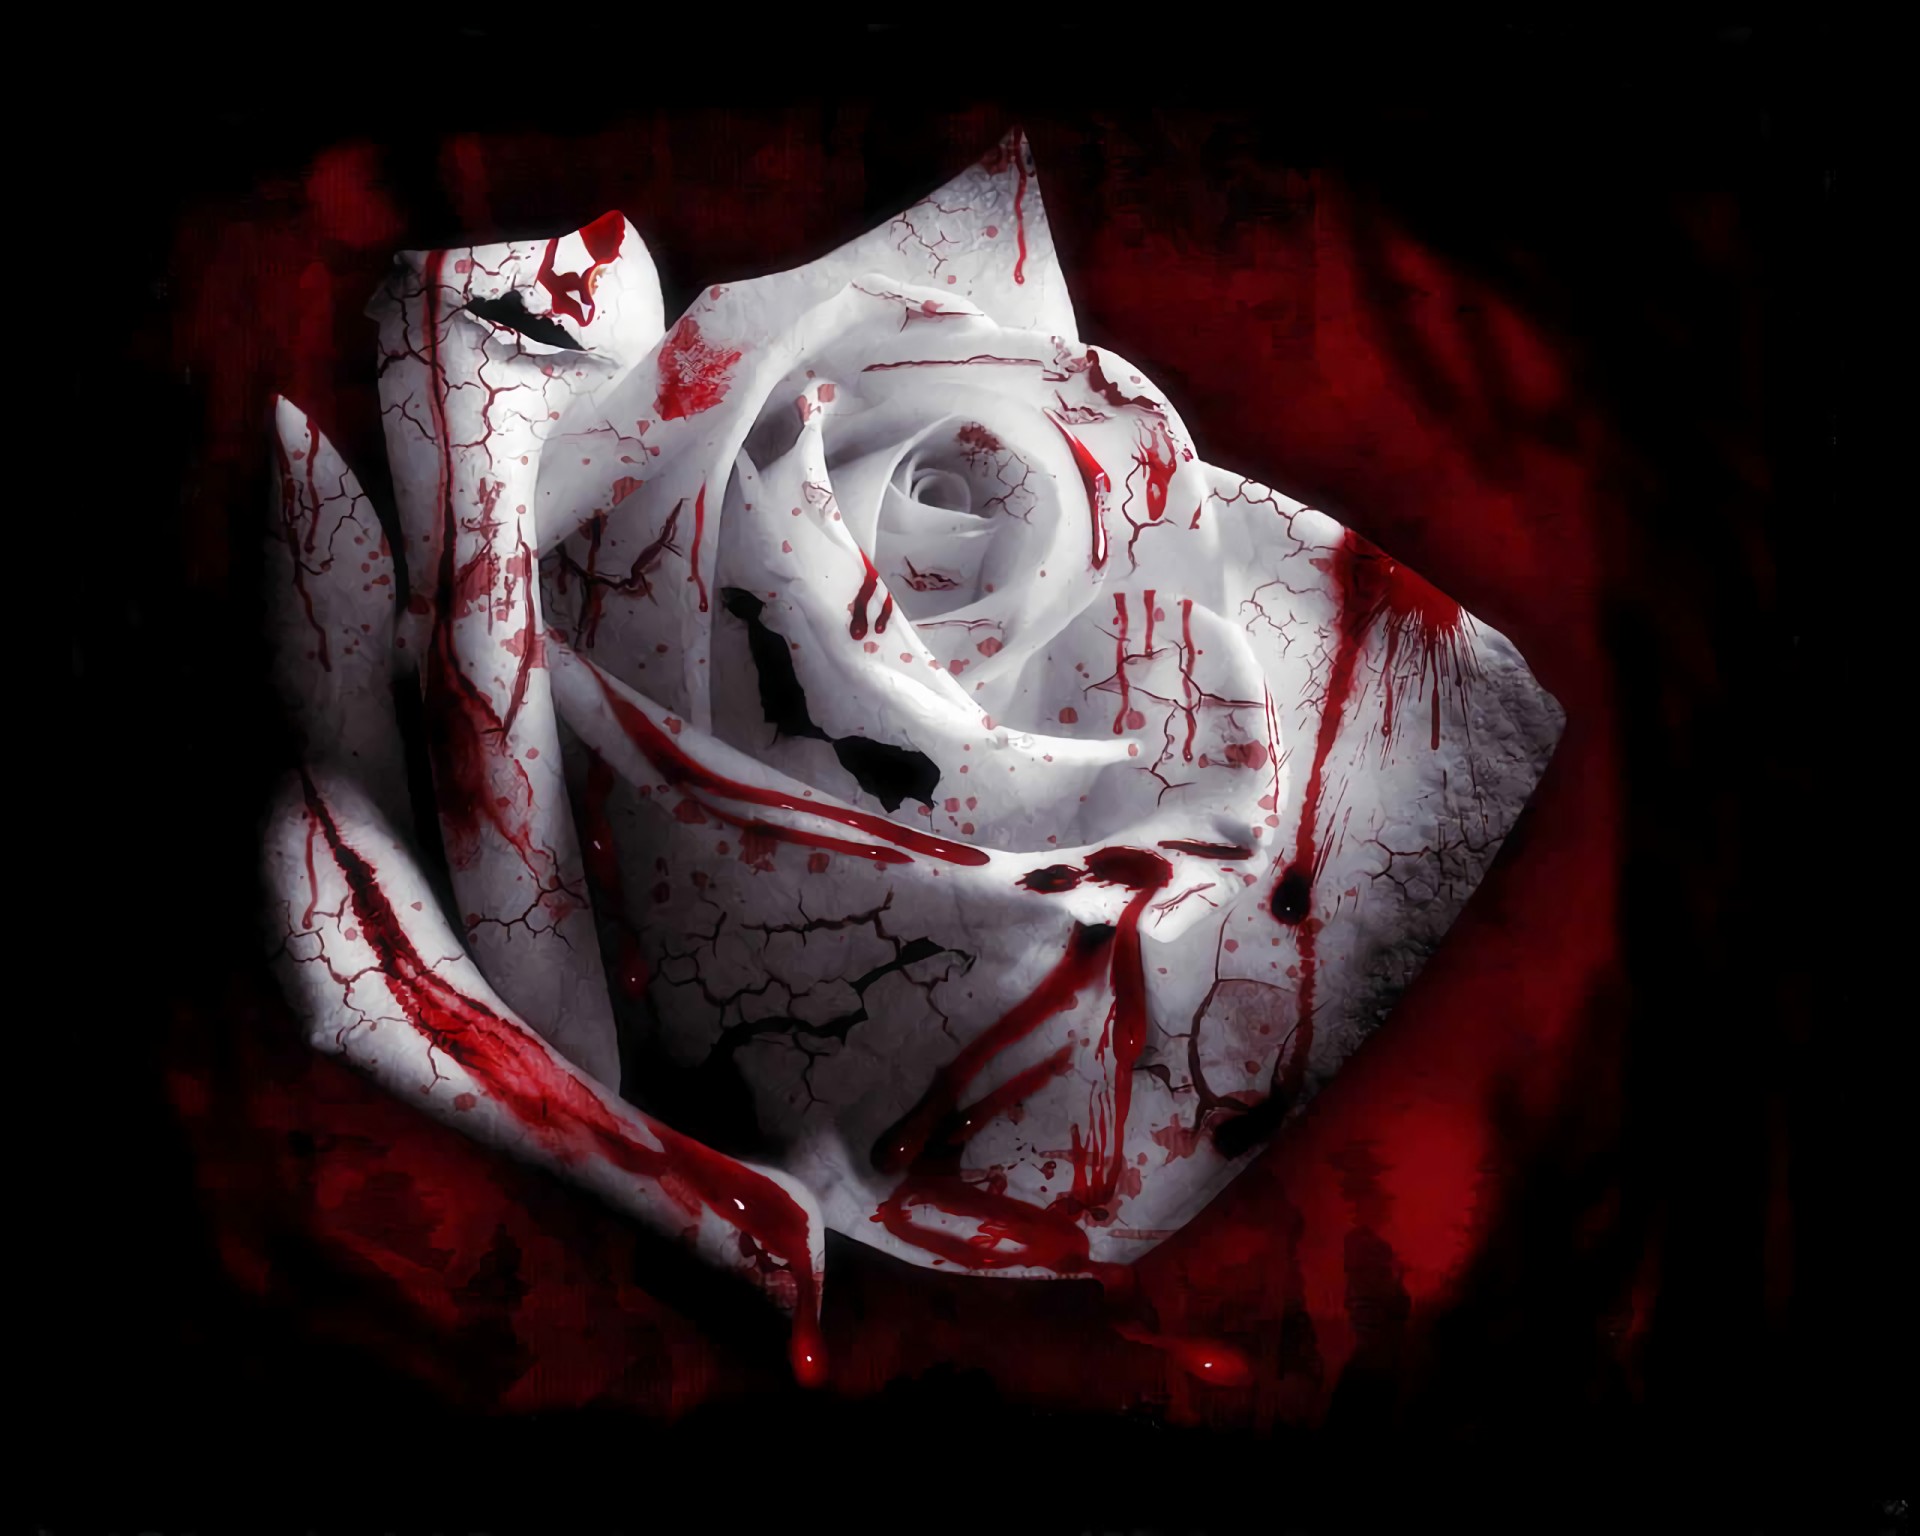 Rose Blood Spatter White Flowers Plants Blood Wallpapers Hd Images, Photos, Reviews